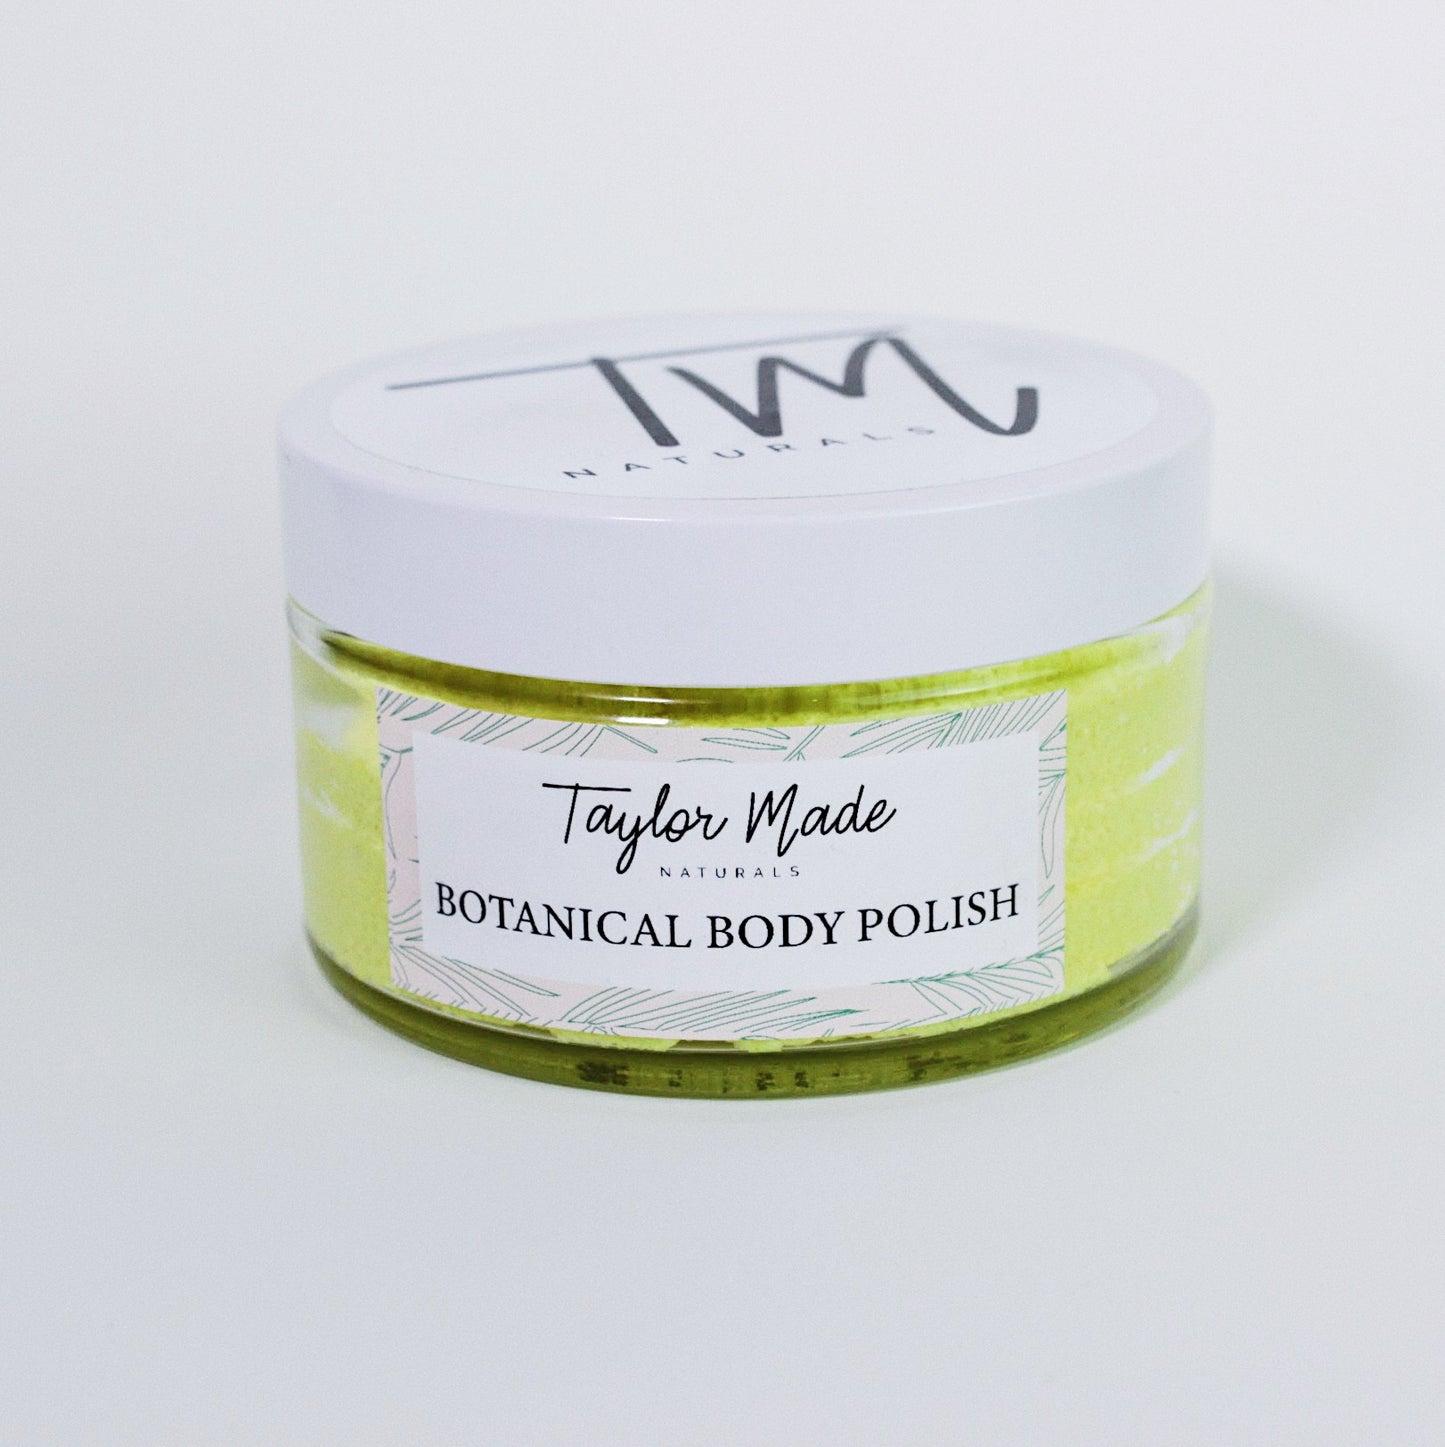 Botanical Body Polish, Handmade Sugar Scrub. Awake your senses with our natural and nourishing body exfoliator. Our Botanical body polish removes dead skin and moisturizes leaving you with silky smooth glowing skin.  Unlike other sugar scrubs made with only oils and sugars, our emulsified body polish becomes a creamy exfoliating lotion upon contact with wet skin. Leaving you with soft supple skin and no oily residue.